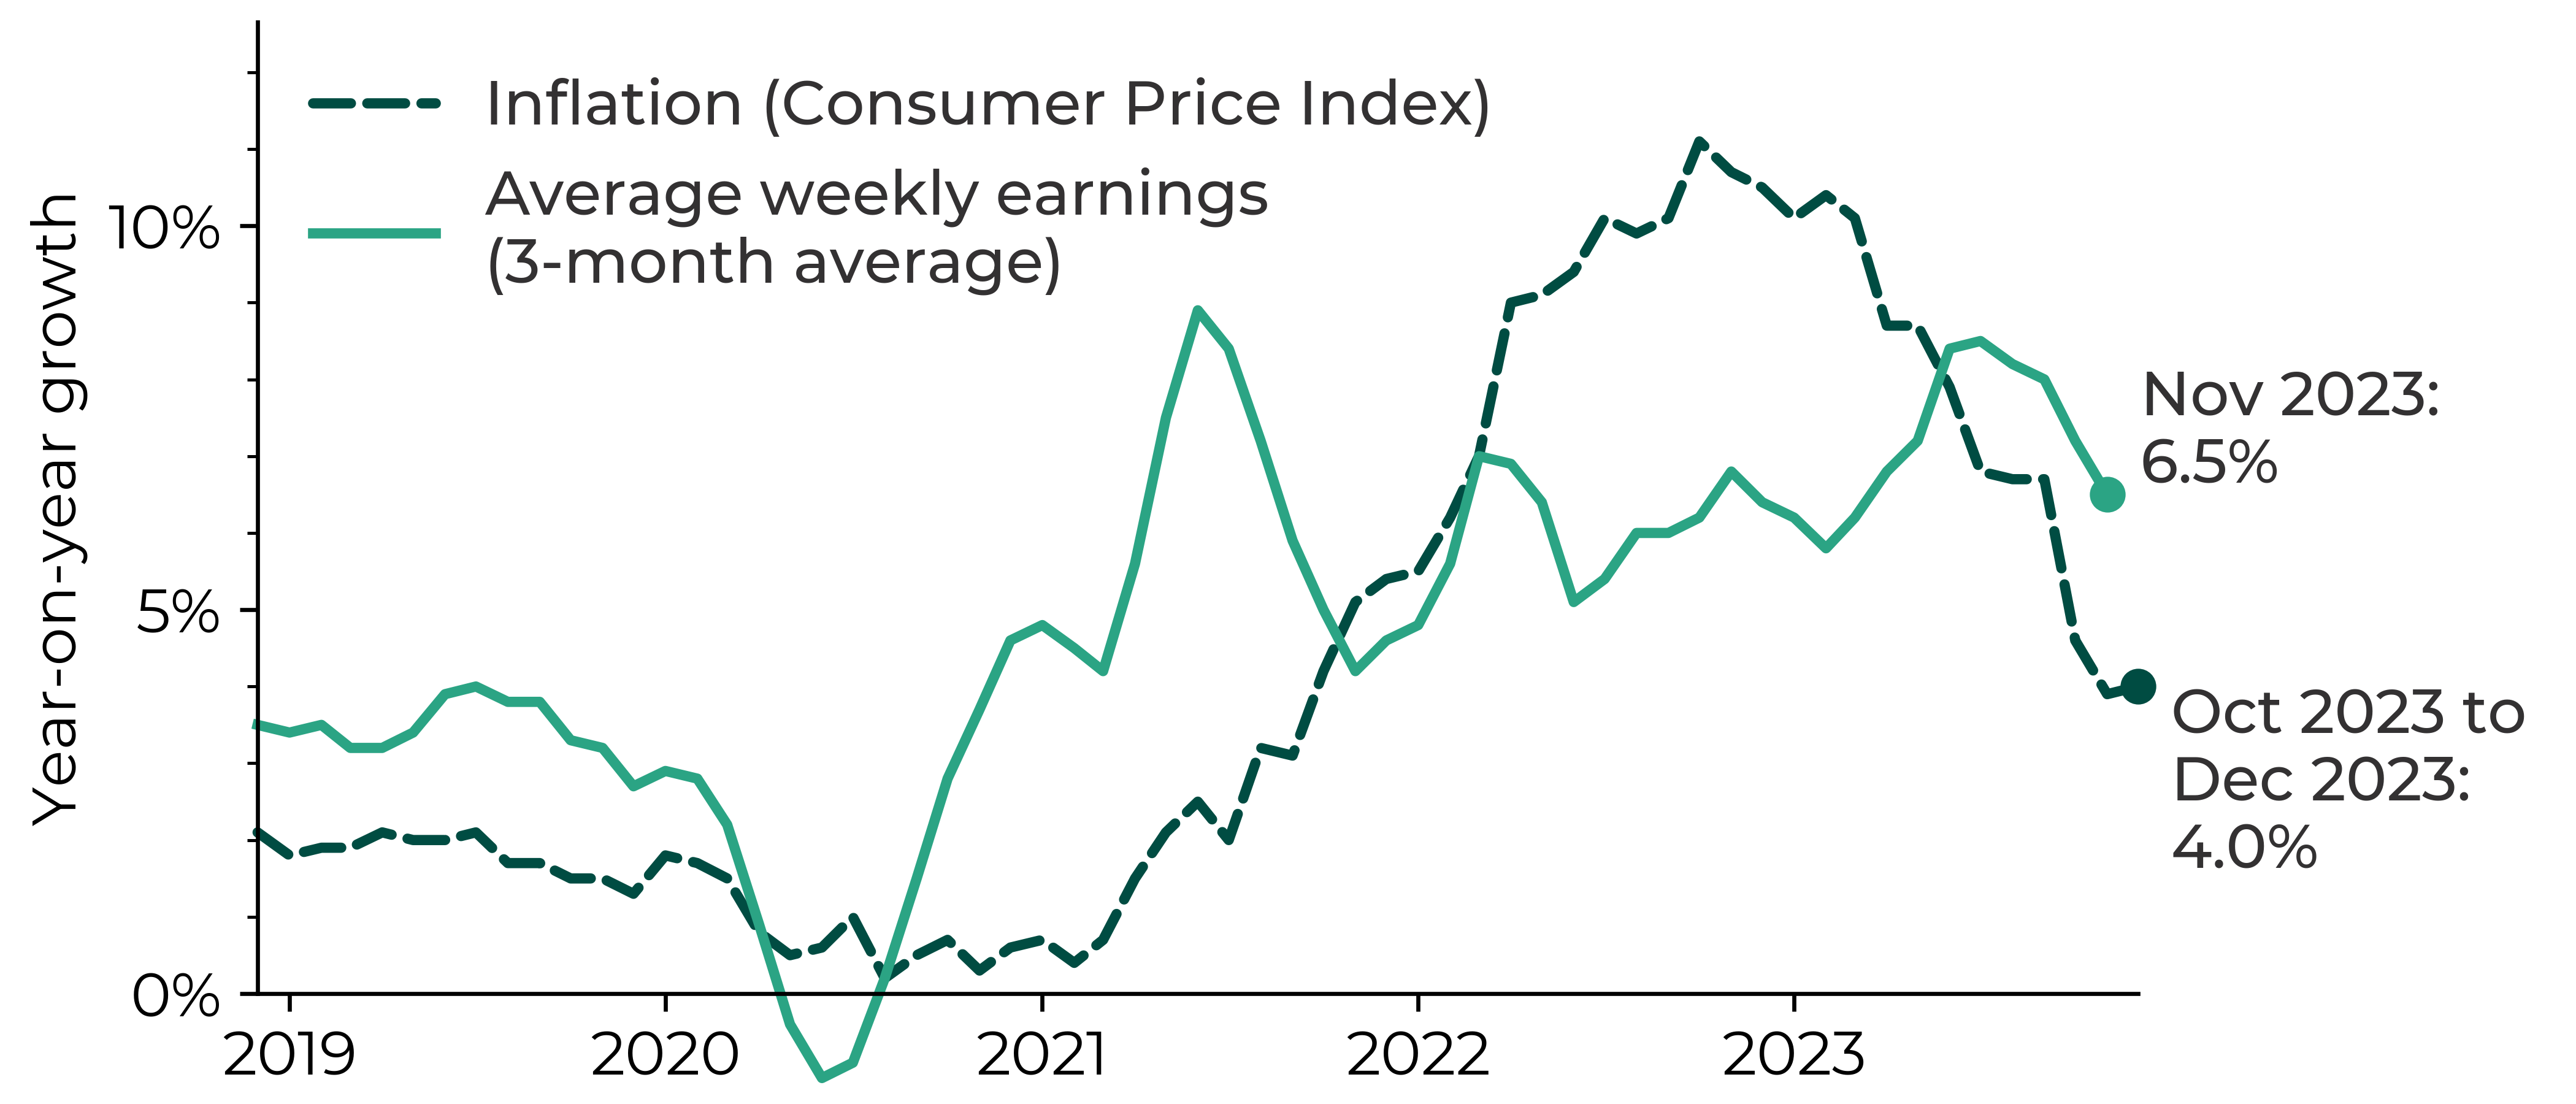 Graph showing UK inflation exceeding average weekly earnings (3-month average) in 2022-23. In November 2023, the average weekly earnings were 6.5% higher than for November 2022 whereas the Consumer Price Index inflation was at 4.0% in October to December 2023.